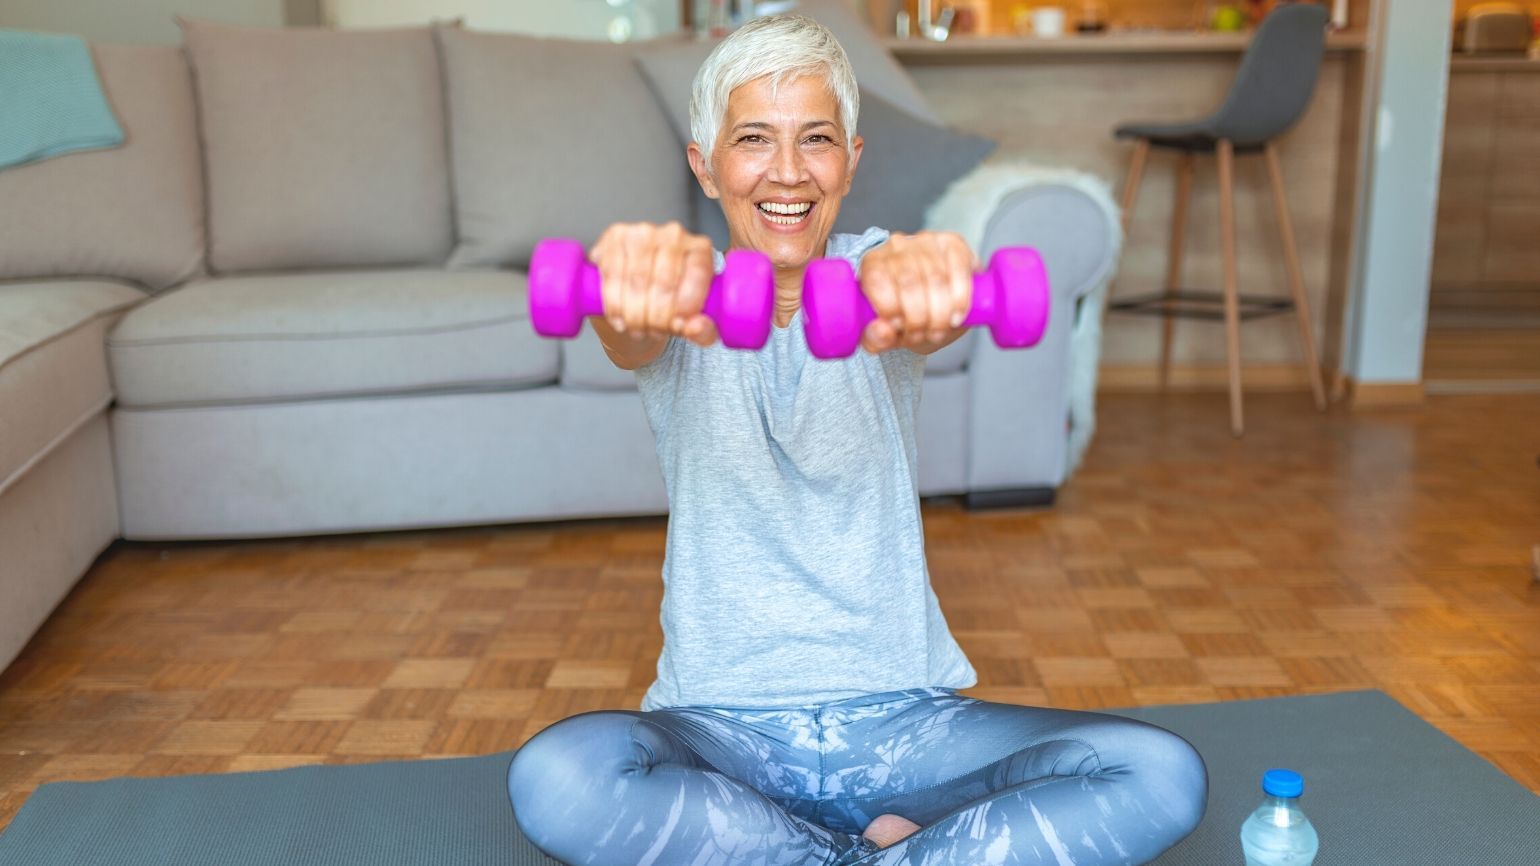 How Seniors Can Kickstart Their At-Home Exercise Routine - Guideposts